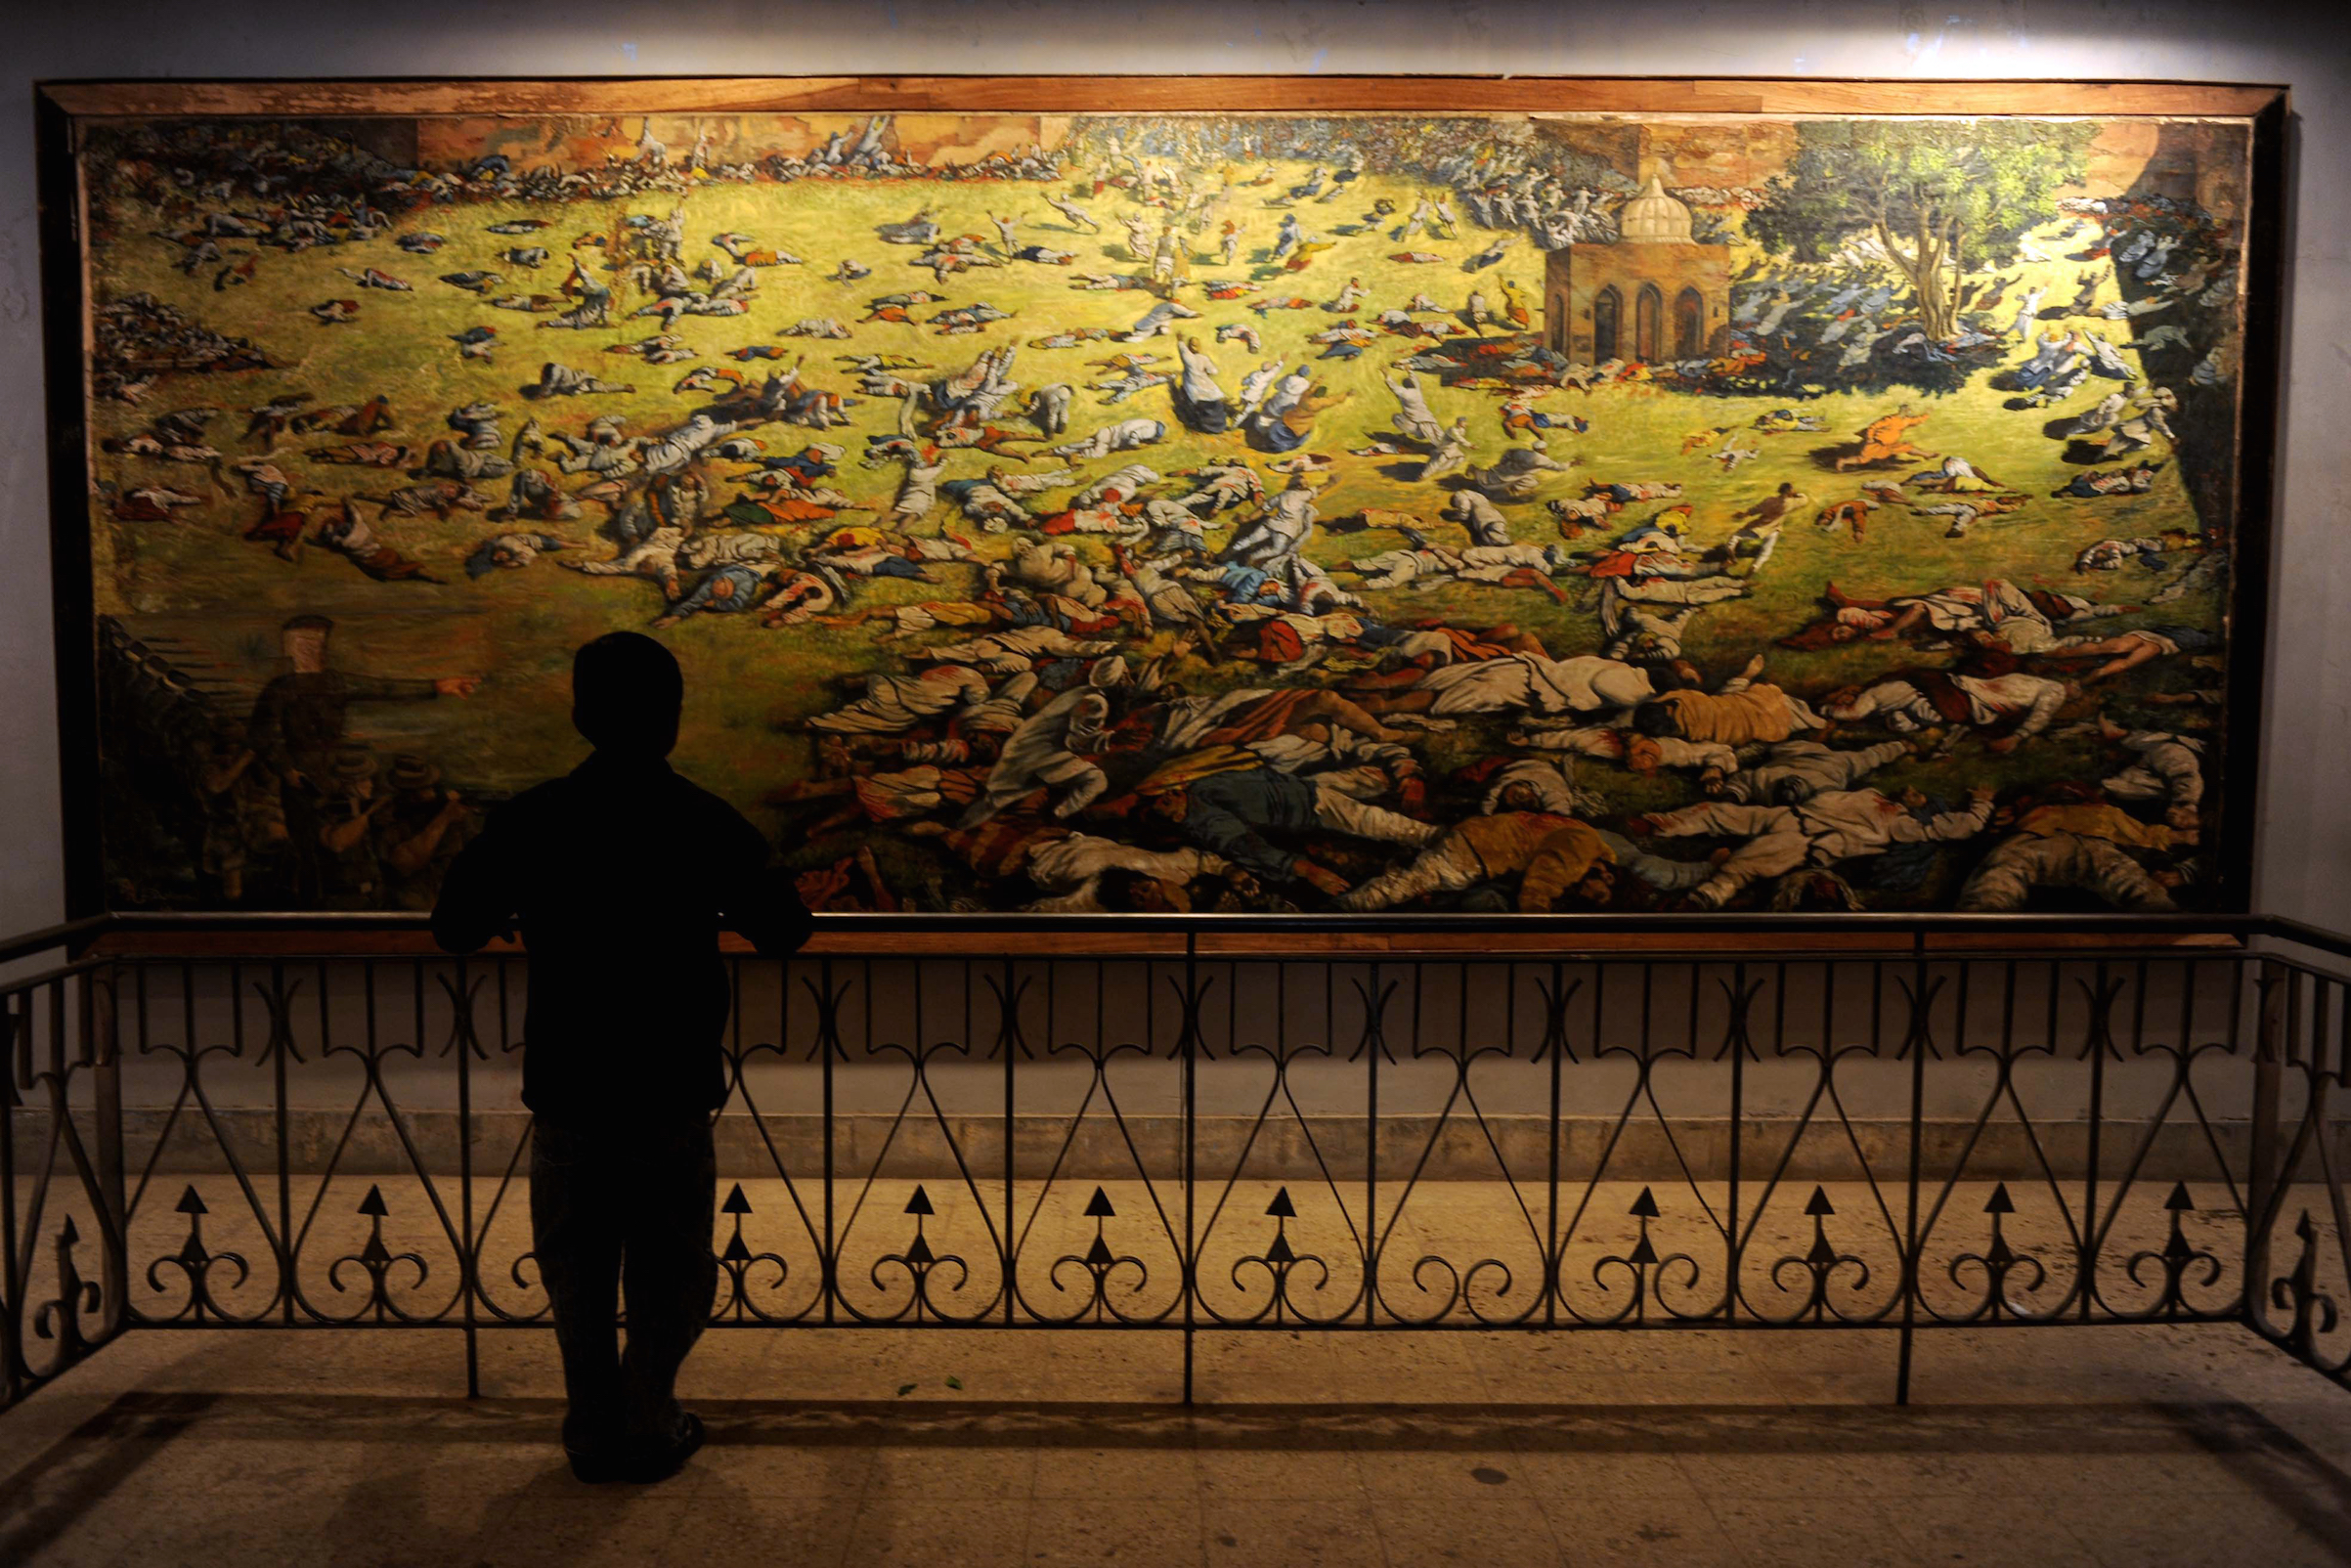 A young visitor looks at a painting depicting the Amritsar Massare at Jallianwala Bagh in Amritsar on Feb. 4, 2010. (Narinder Nanu—AFP/Getty Images)